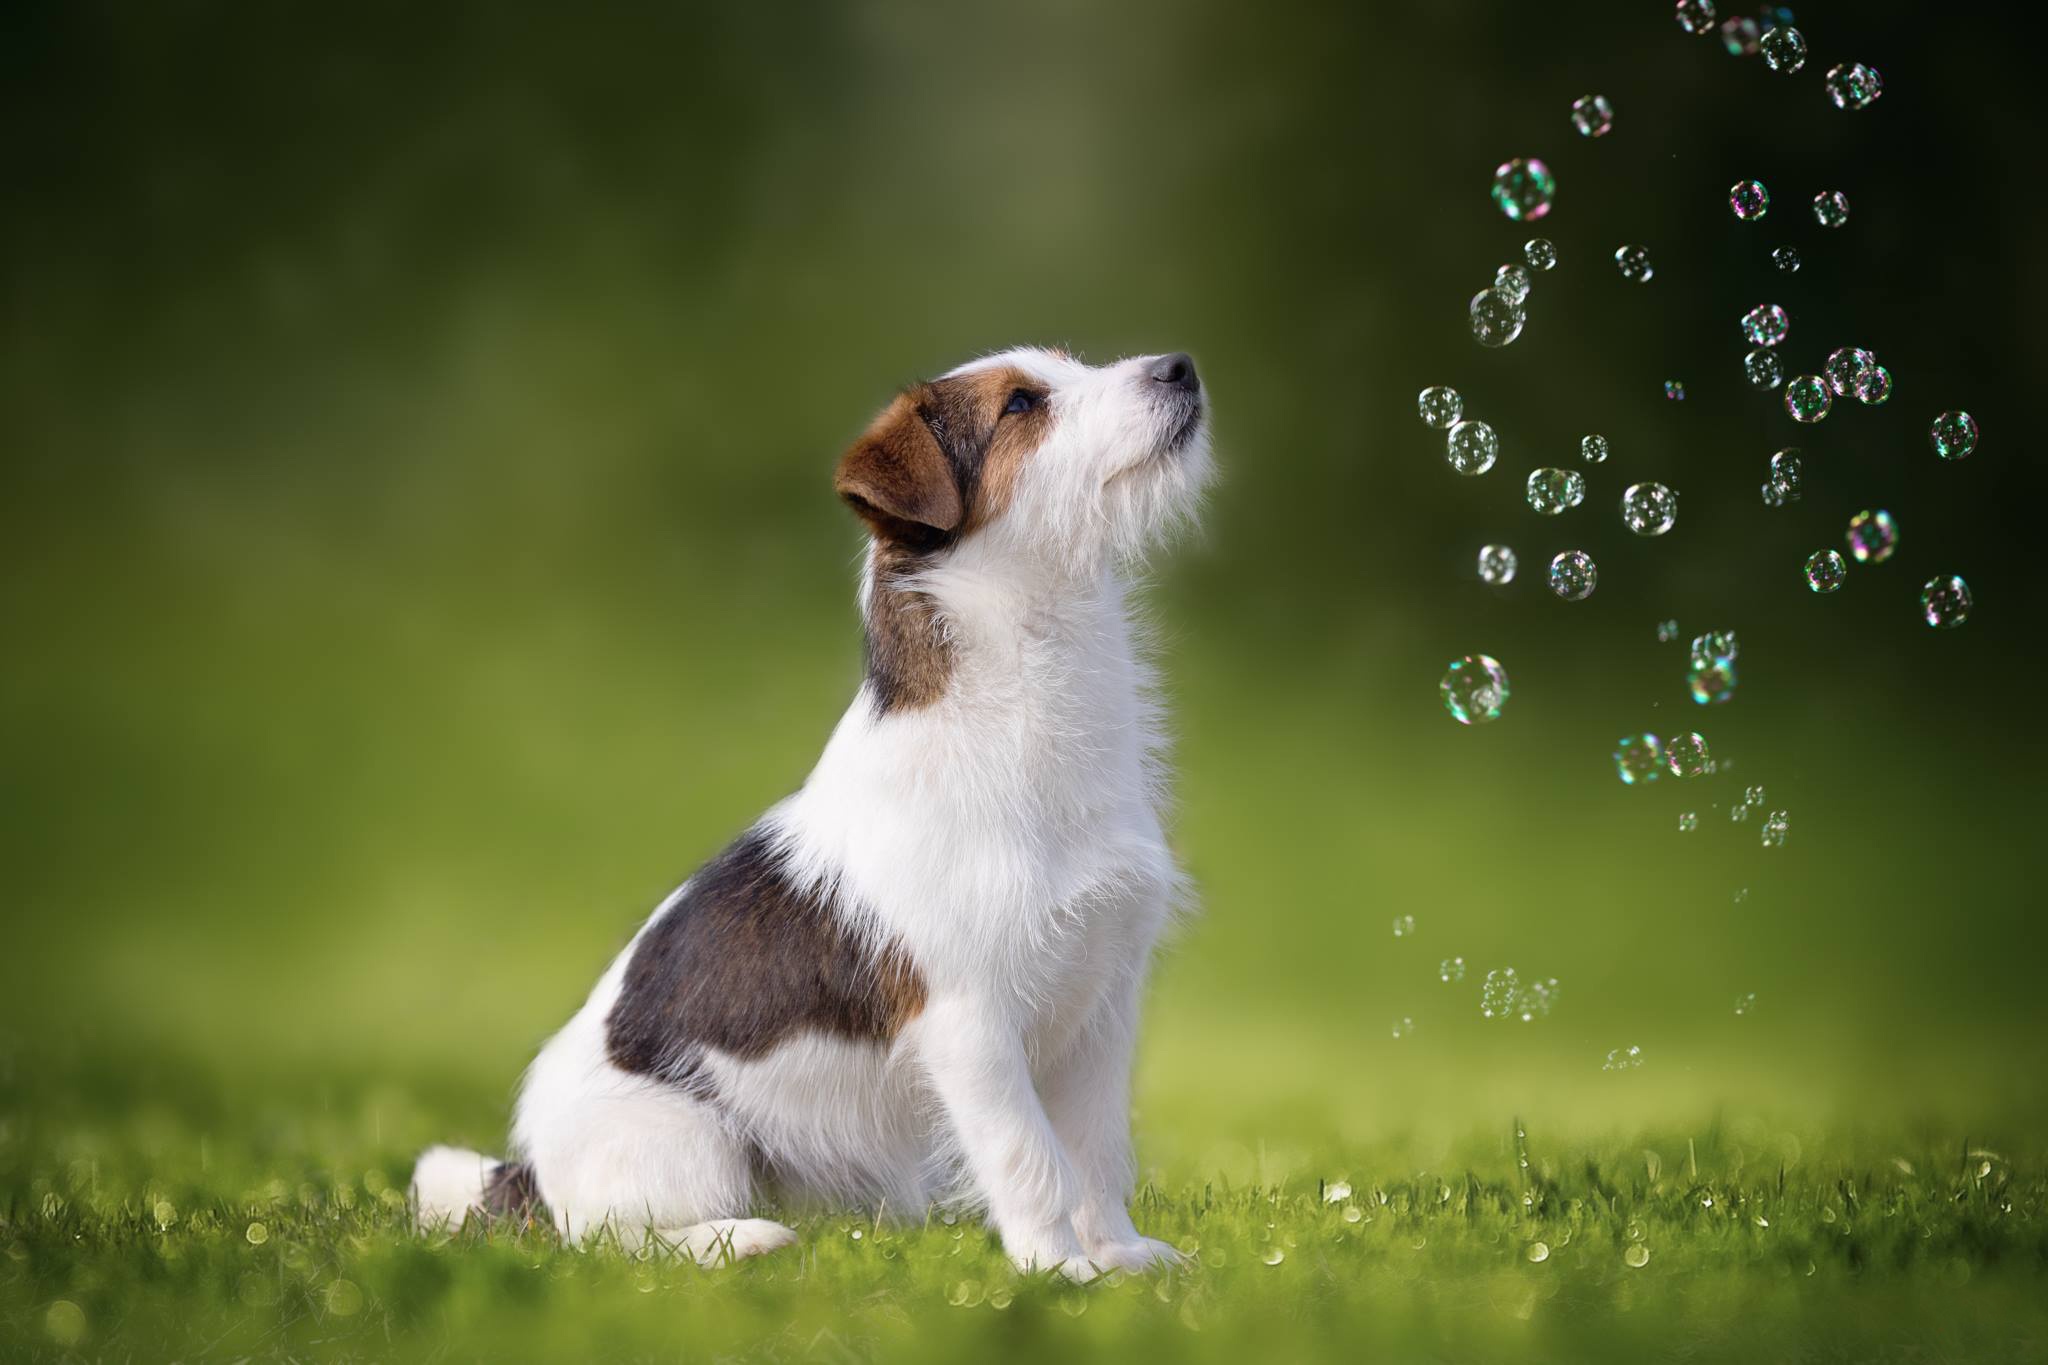 Dog Soap Bubbles Wallpapers High Quality | Download Free